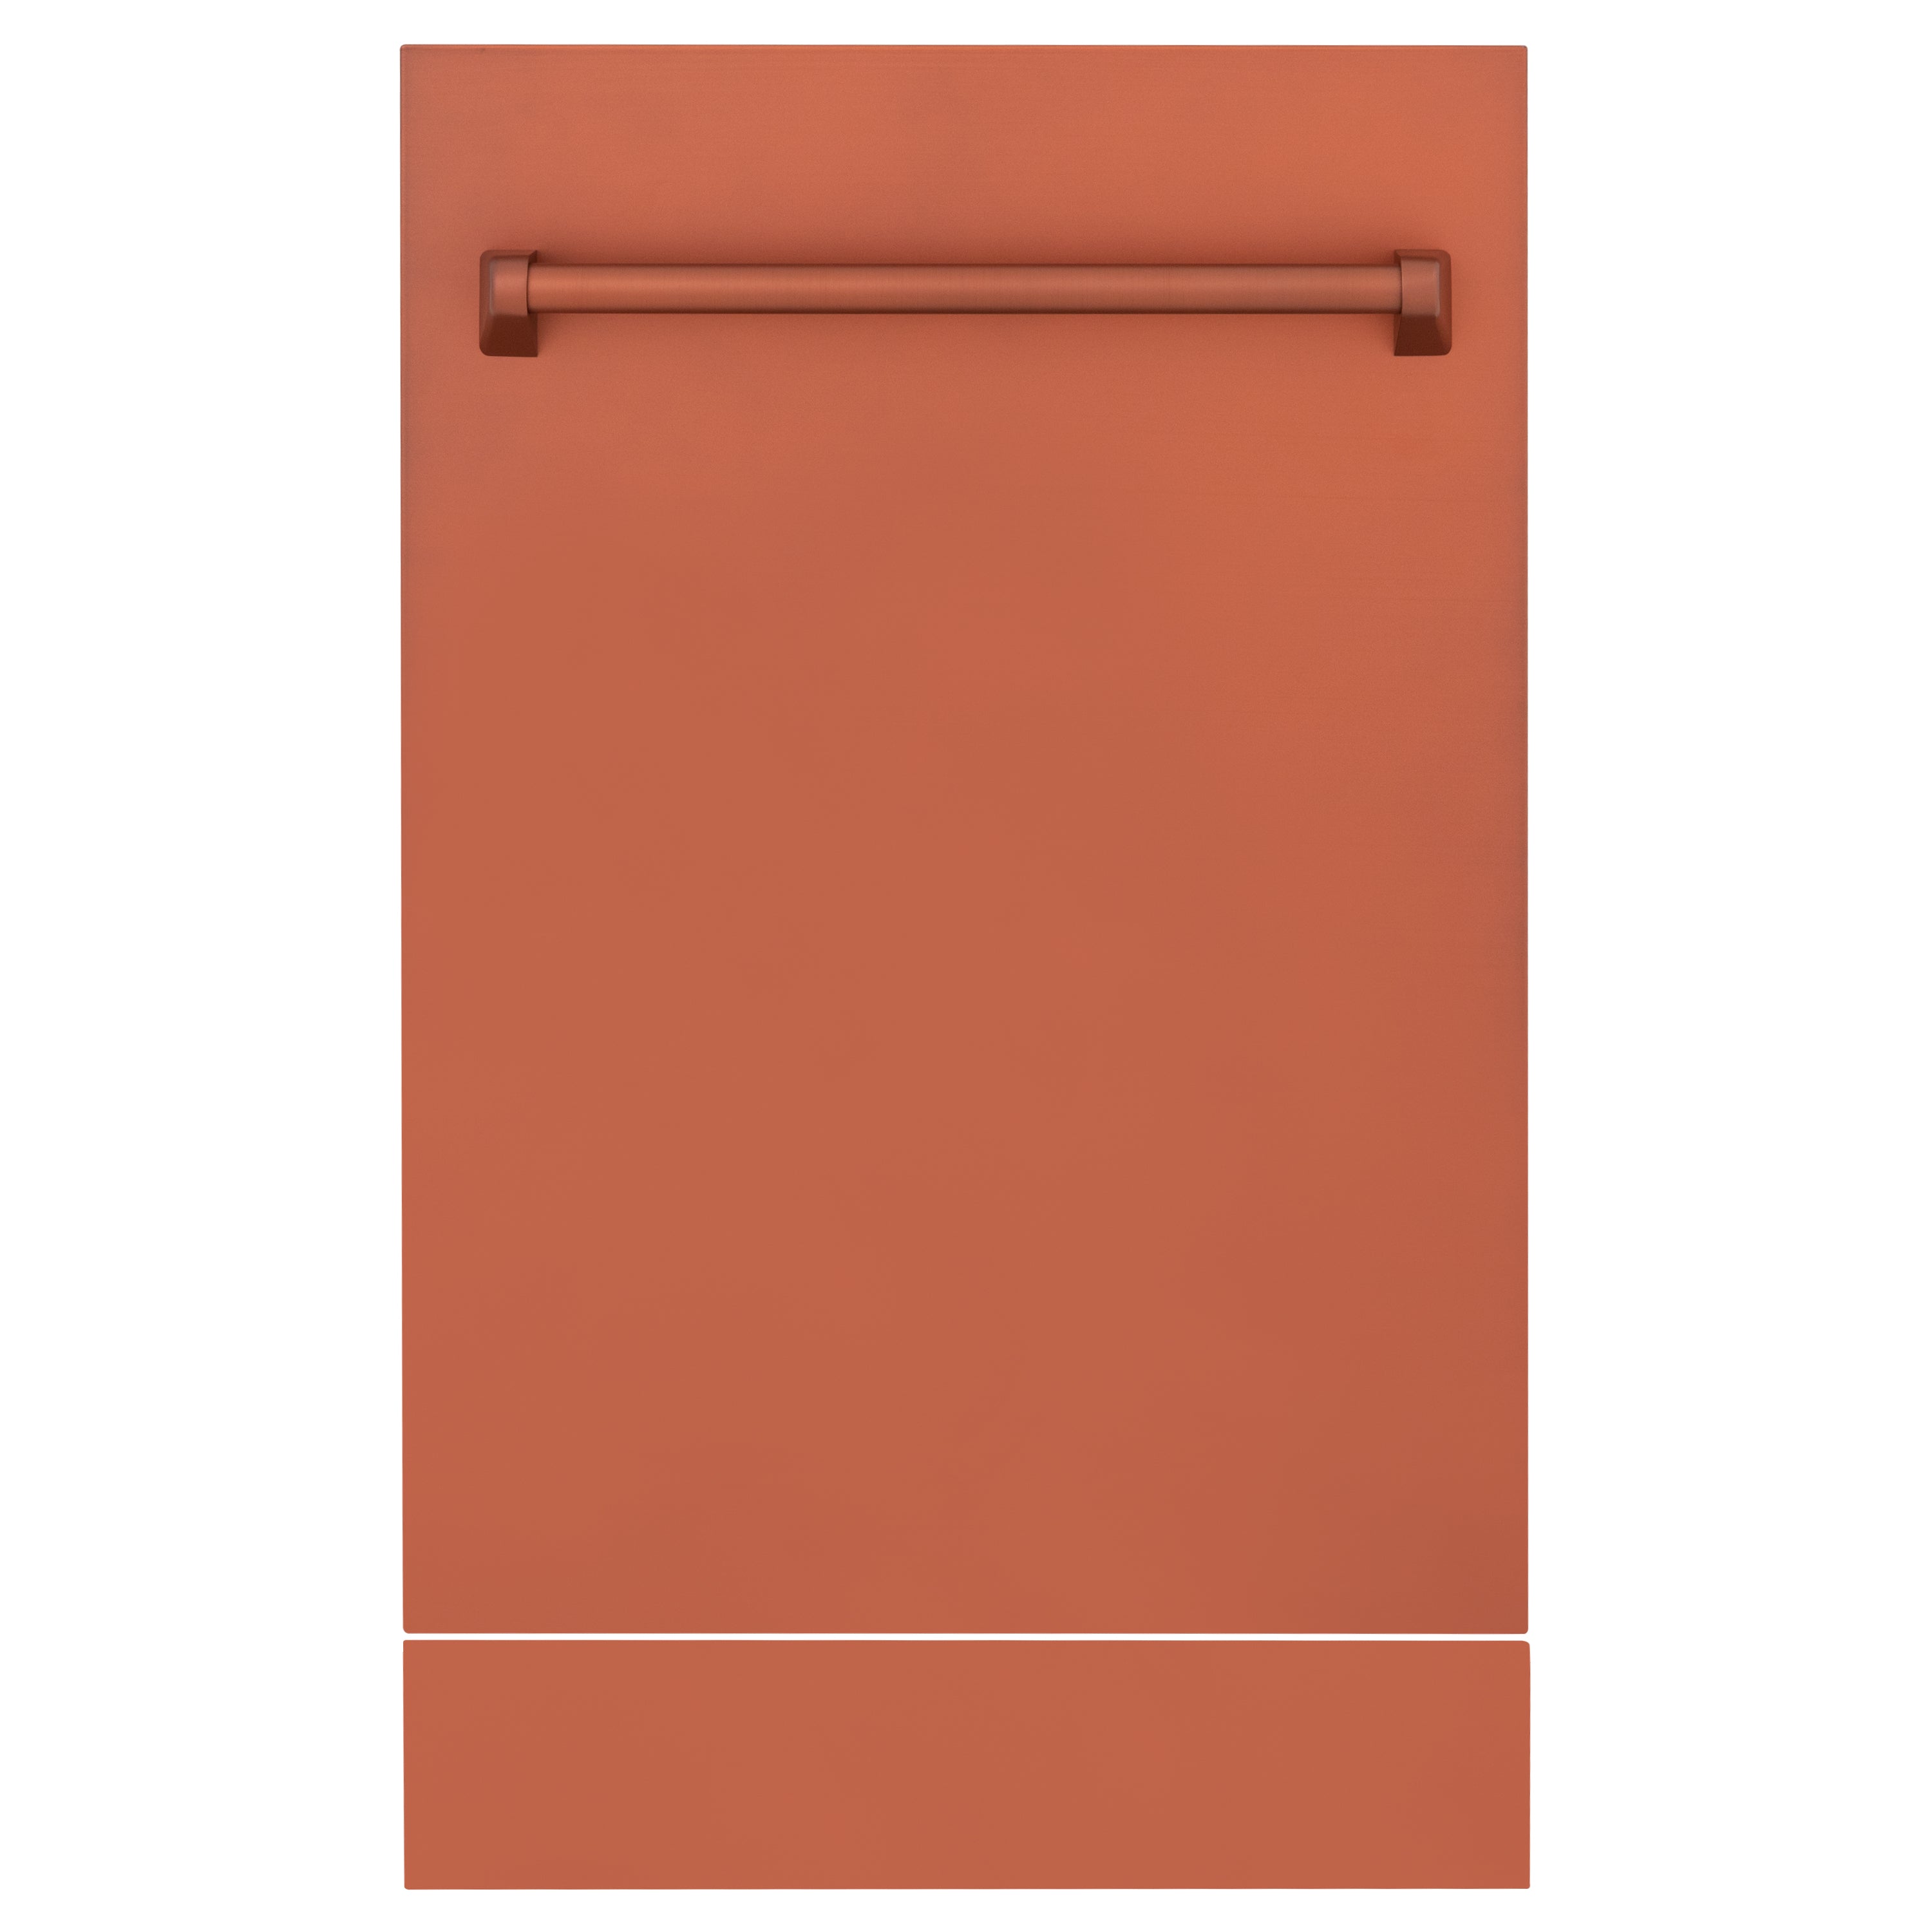 ZLINE 18" Tallac Dishwasher Panel in Copper with Traditional Handle (DPV-C-18)